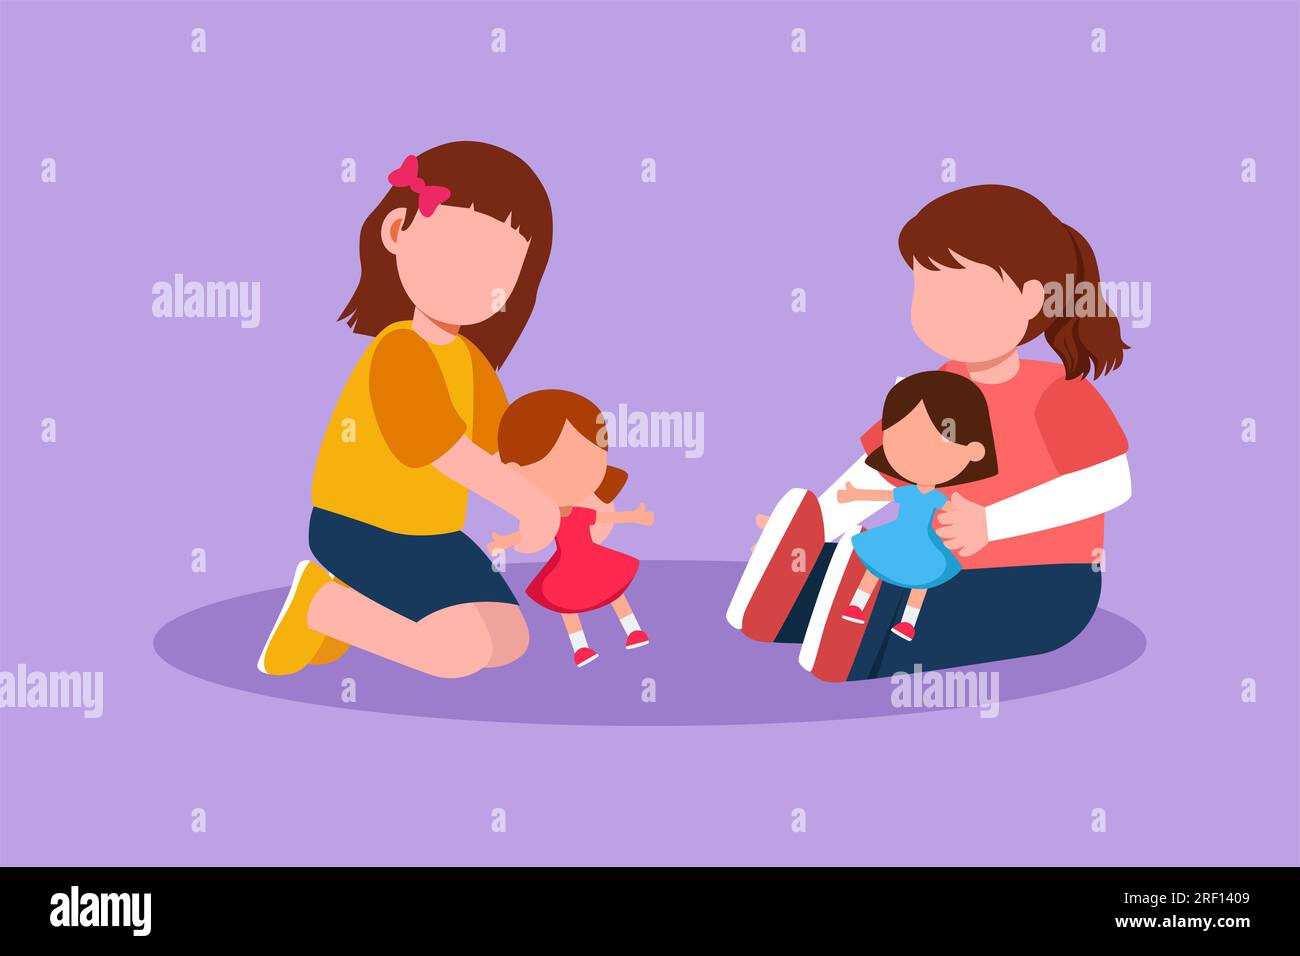 Cartoon flat style drawing two little girls playing with dolls. Happy kids playing together. Child characters with cute dolls. Childhood and preschool Stock Photo